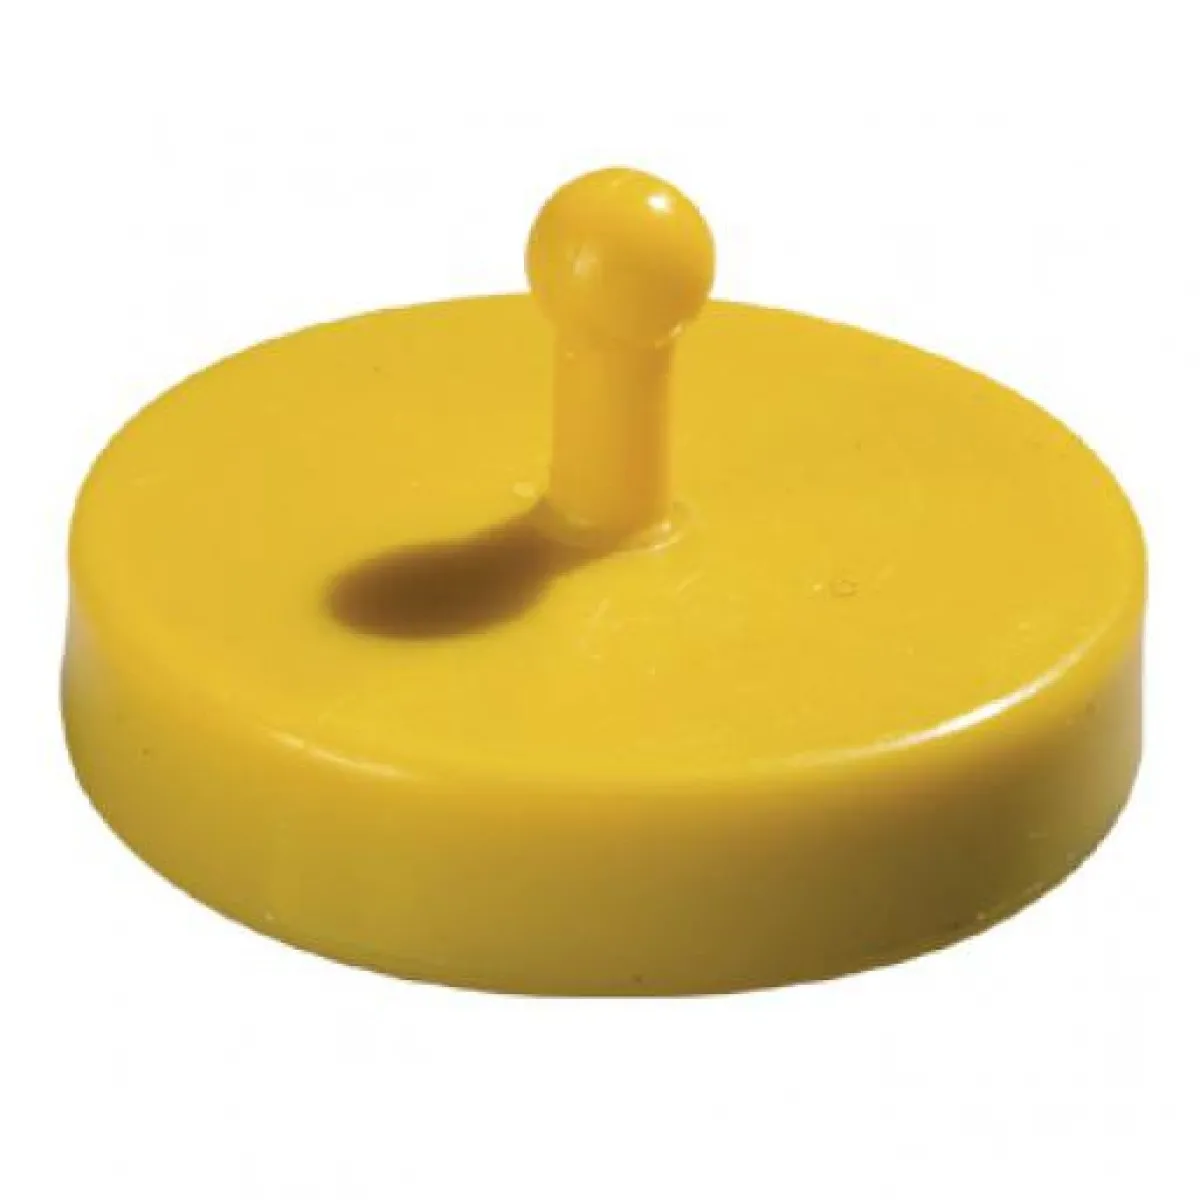 Racing weight for squeaky ducks and rubber ducks